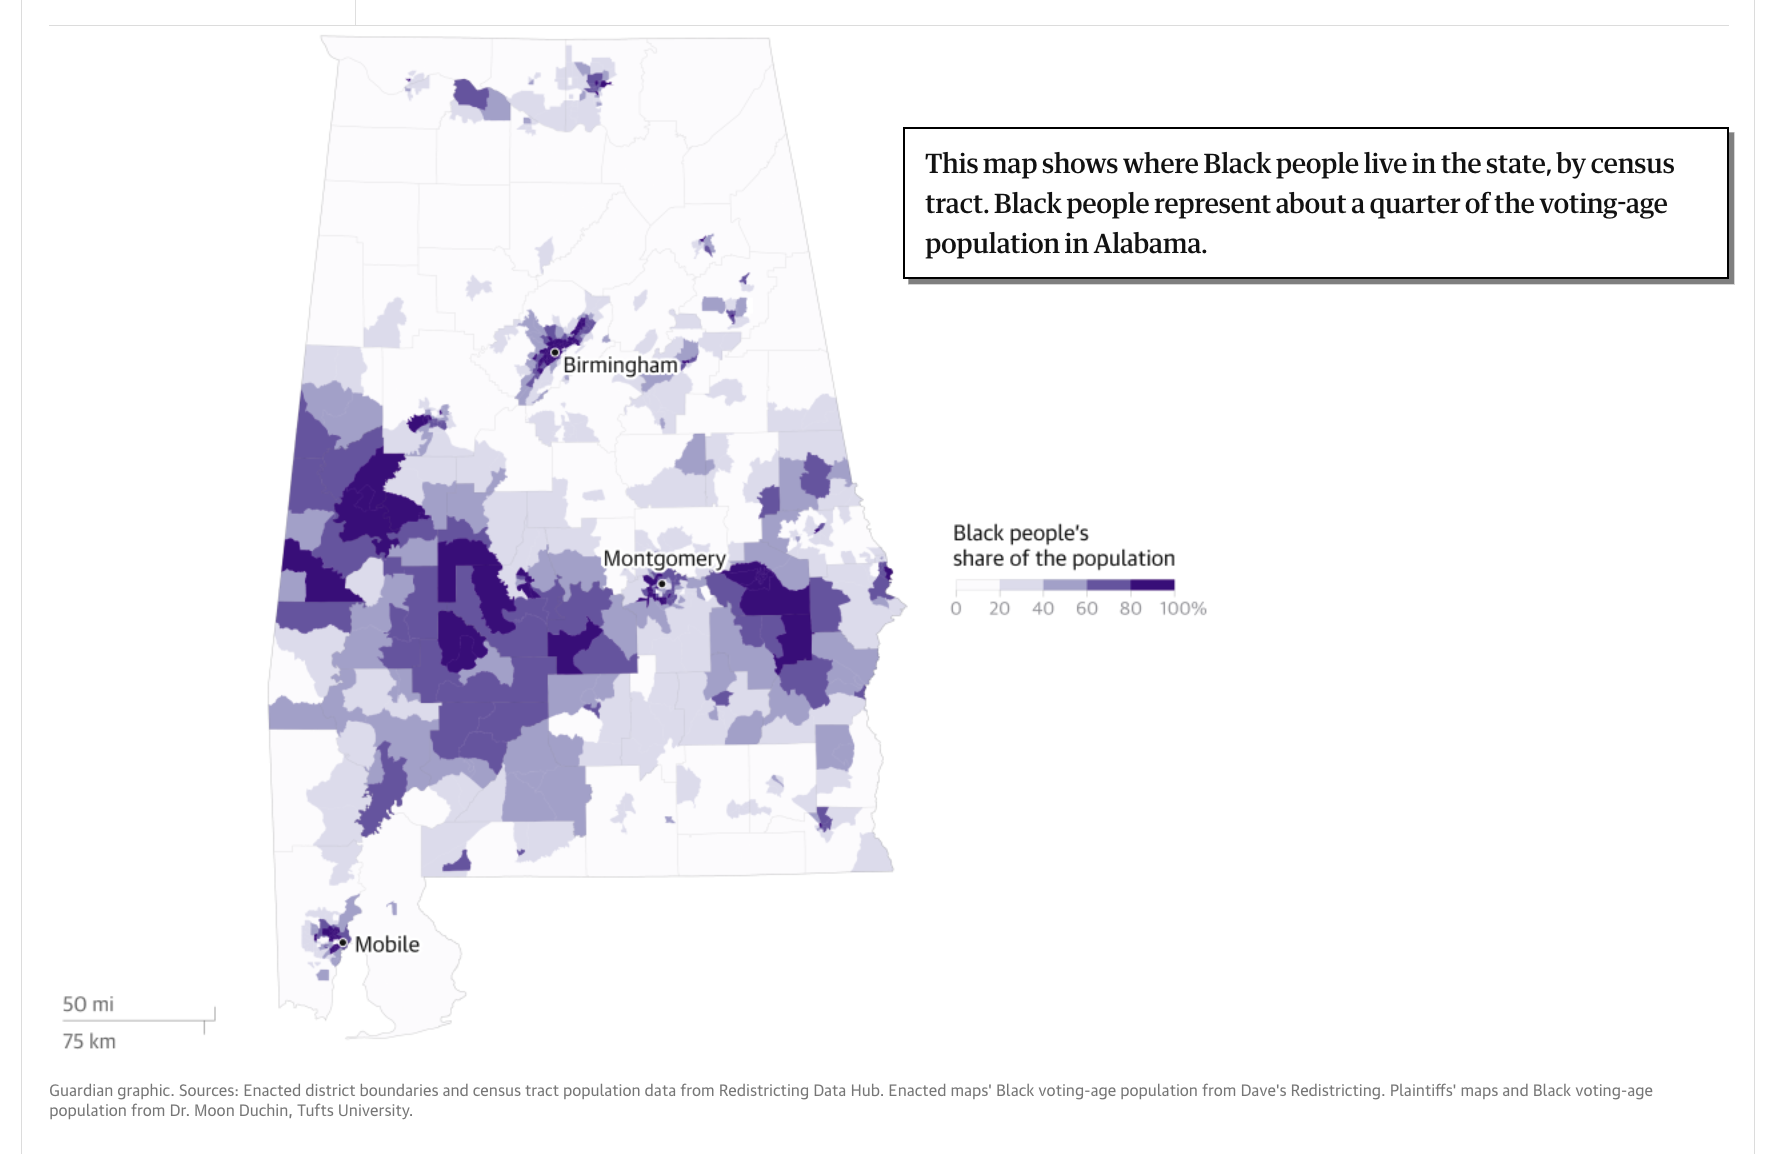 This map shows where Black people live in the state by census tract.
            Black people represent about a quarter of the voting age population in
            Alabama.